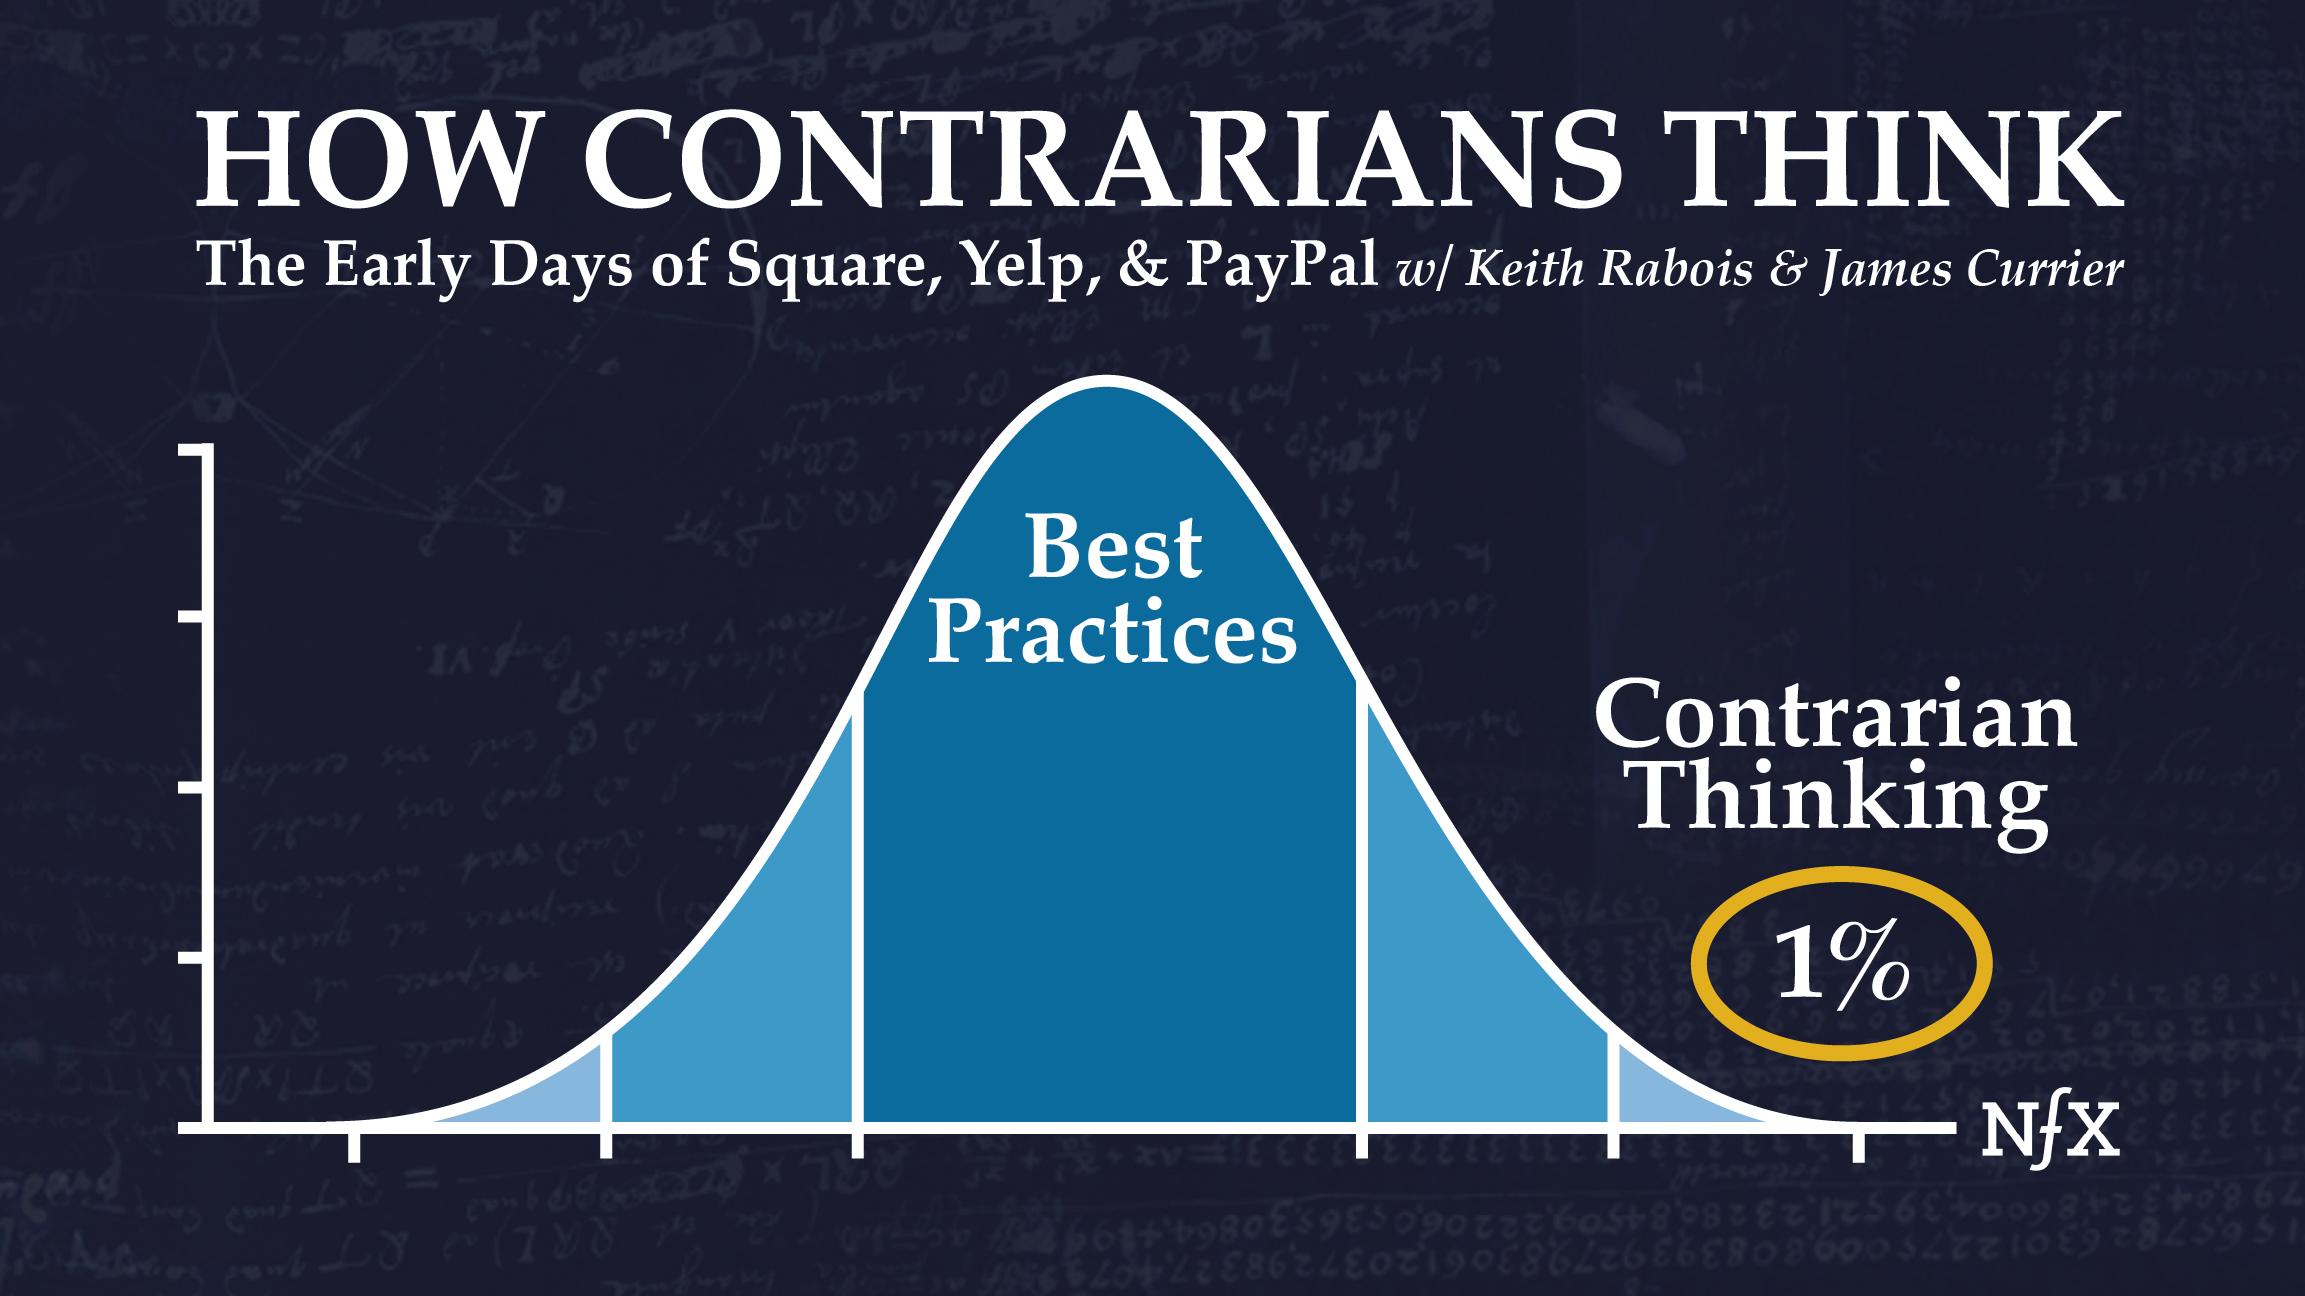 How Contrarians Think: The Early Days of Square, Yelp & PayPal with Keith Rabois